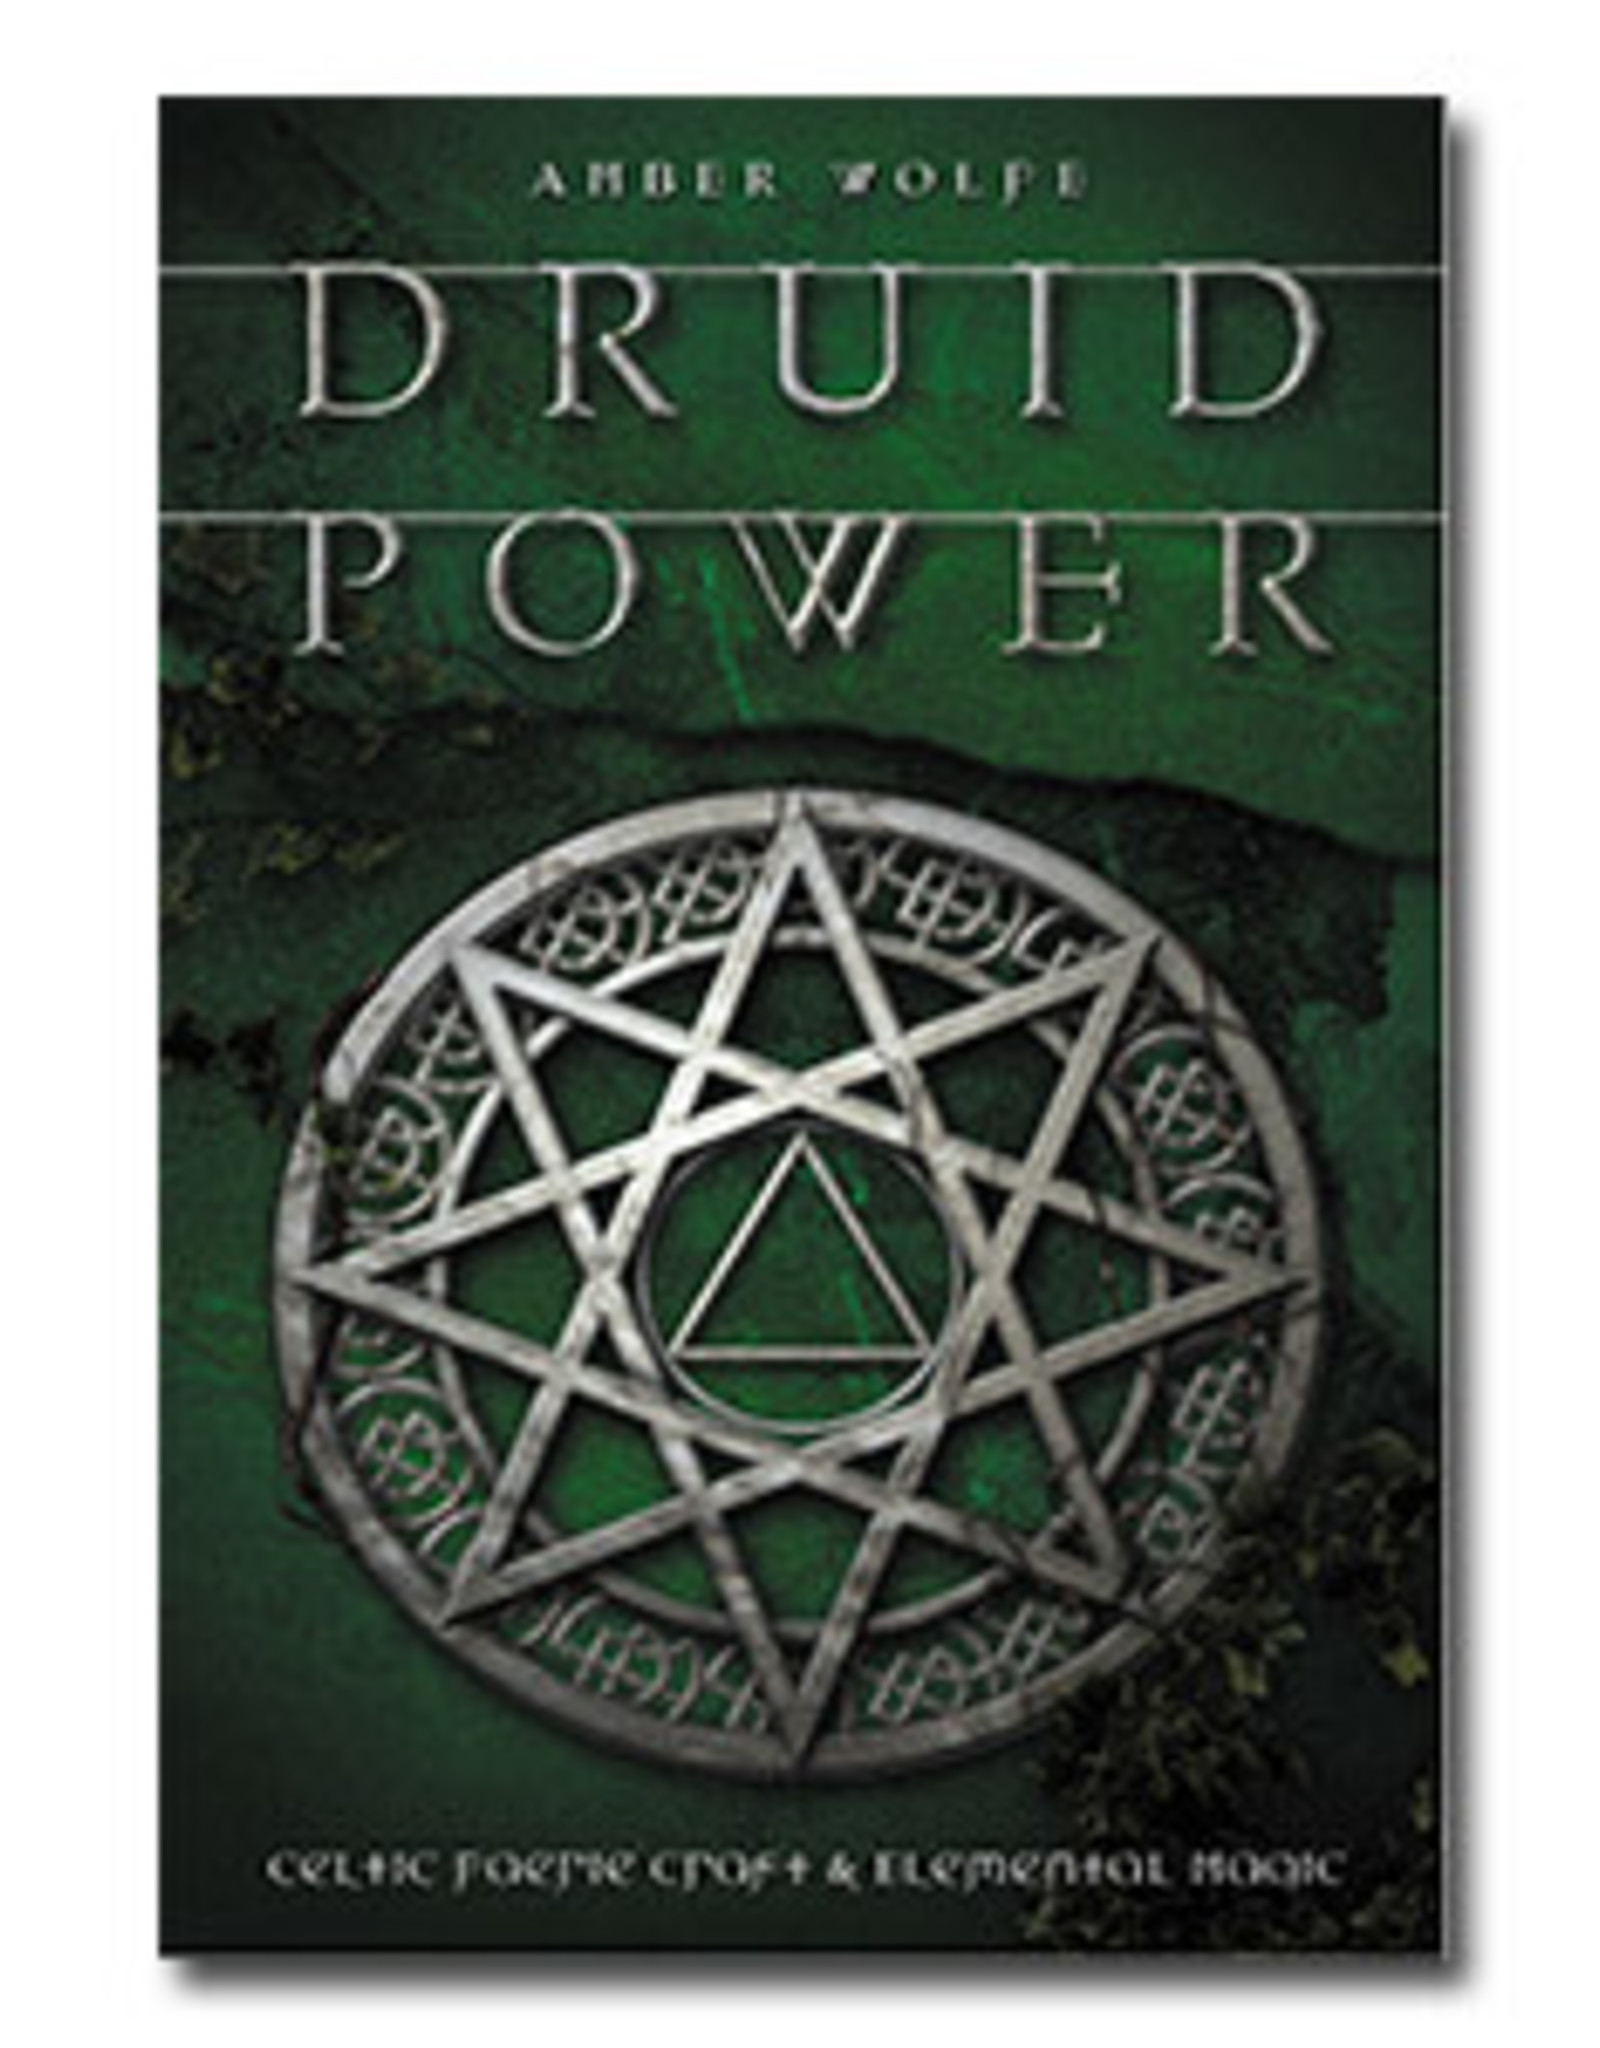 Amber Wolfe Druid Power by Amber Wolfe